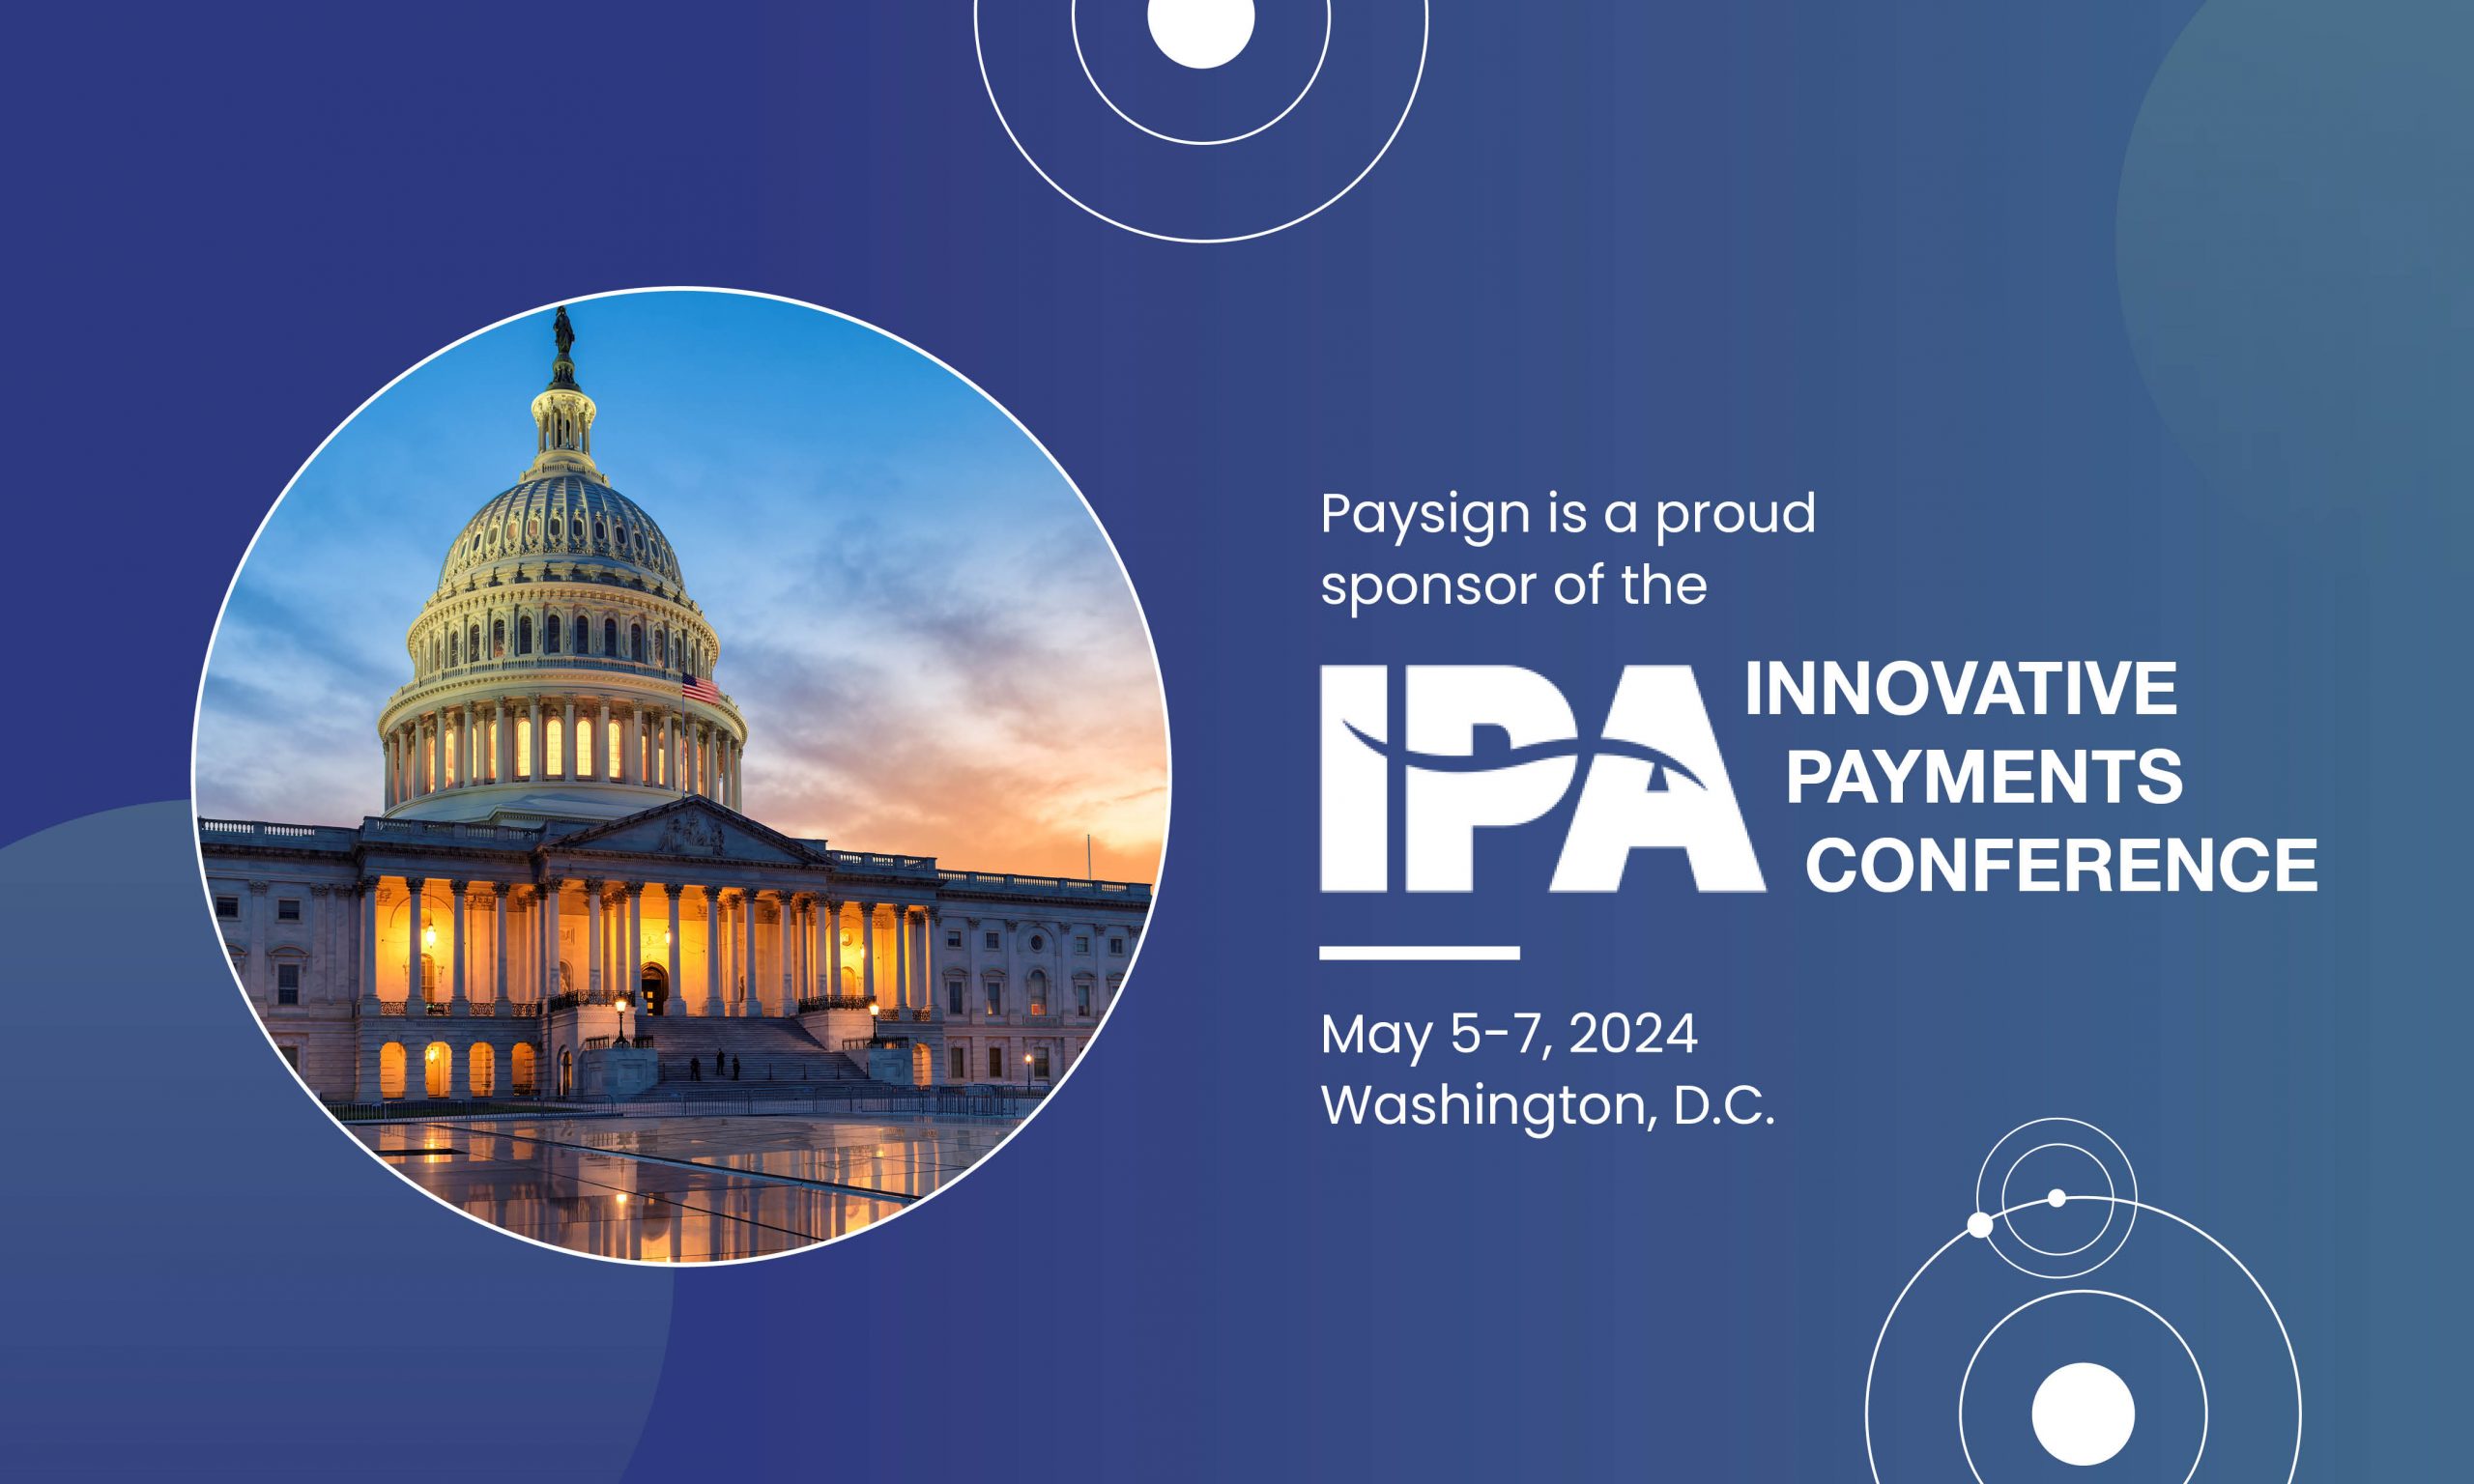 Paysign will be a sponsor at the annual Innovative Payments Conference, “Unlocking the Future of Payments” in Washington, D.C. on May 05-07, 2024.